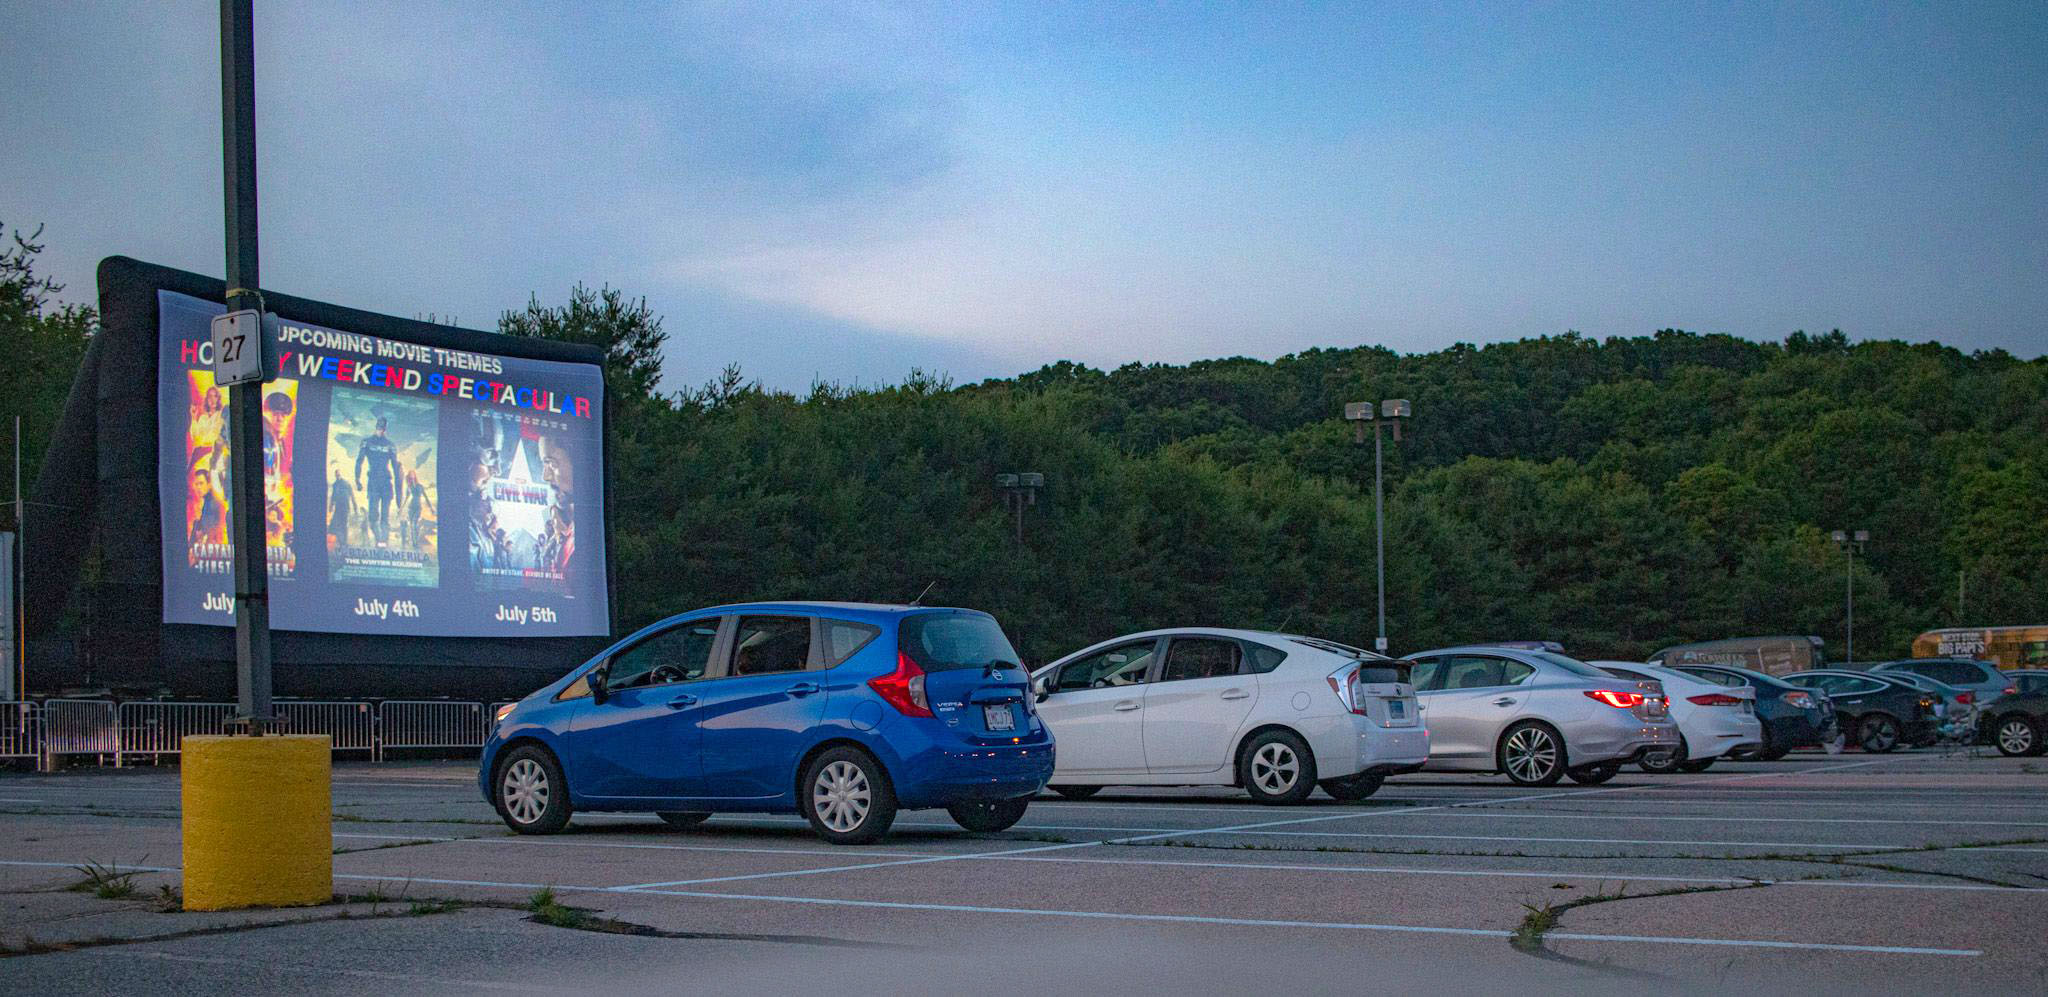 Foxwoods Resort Casino Introduces Drive-in Movie Experience - Tribal Gaming And Hospitality Magazine